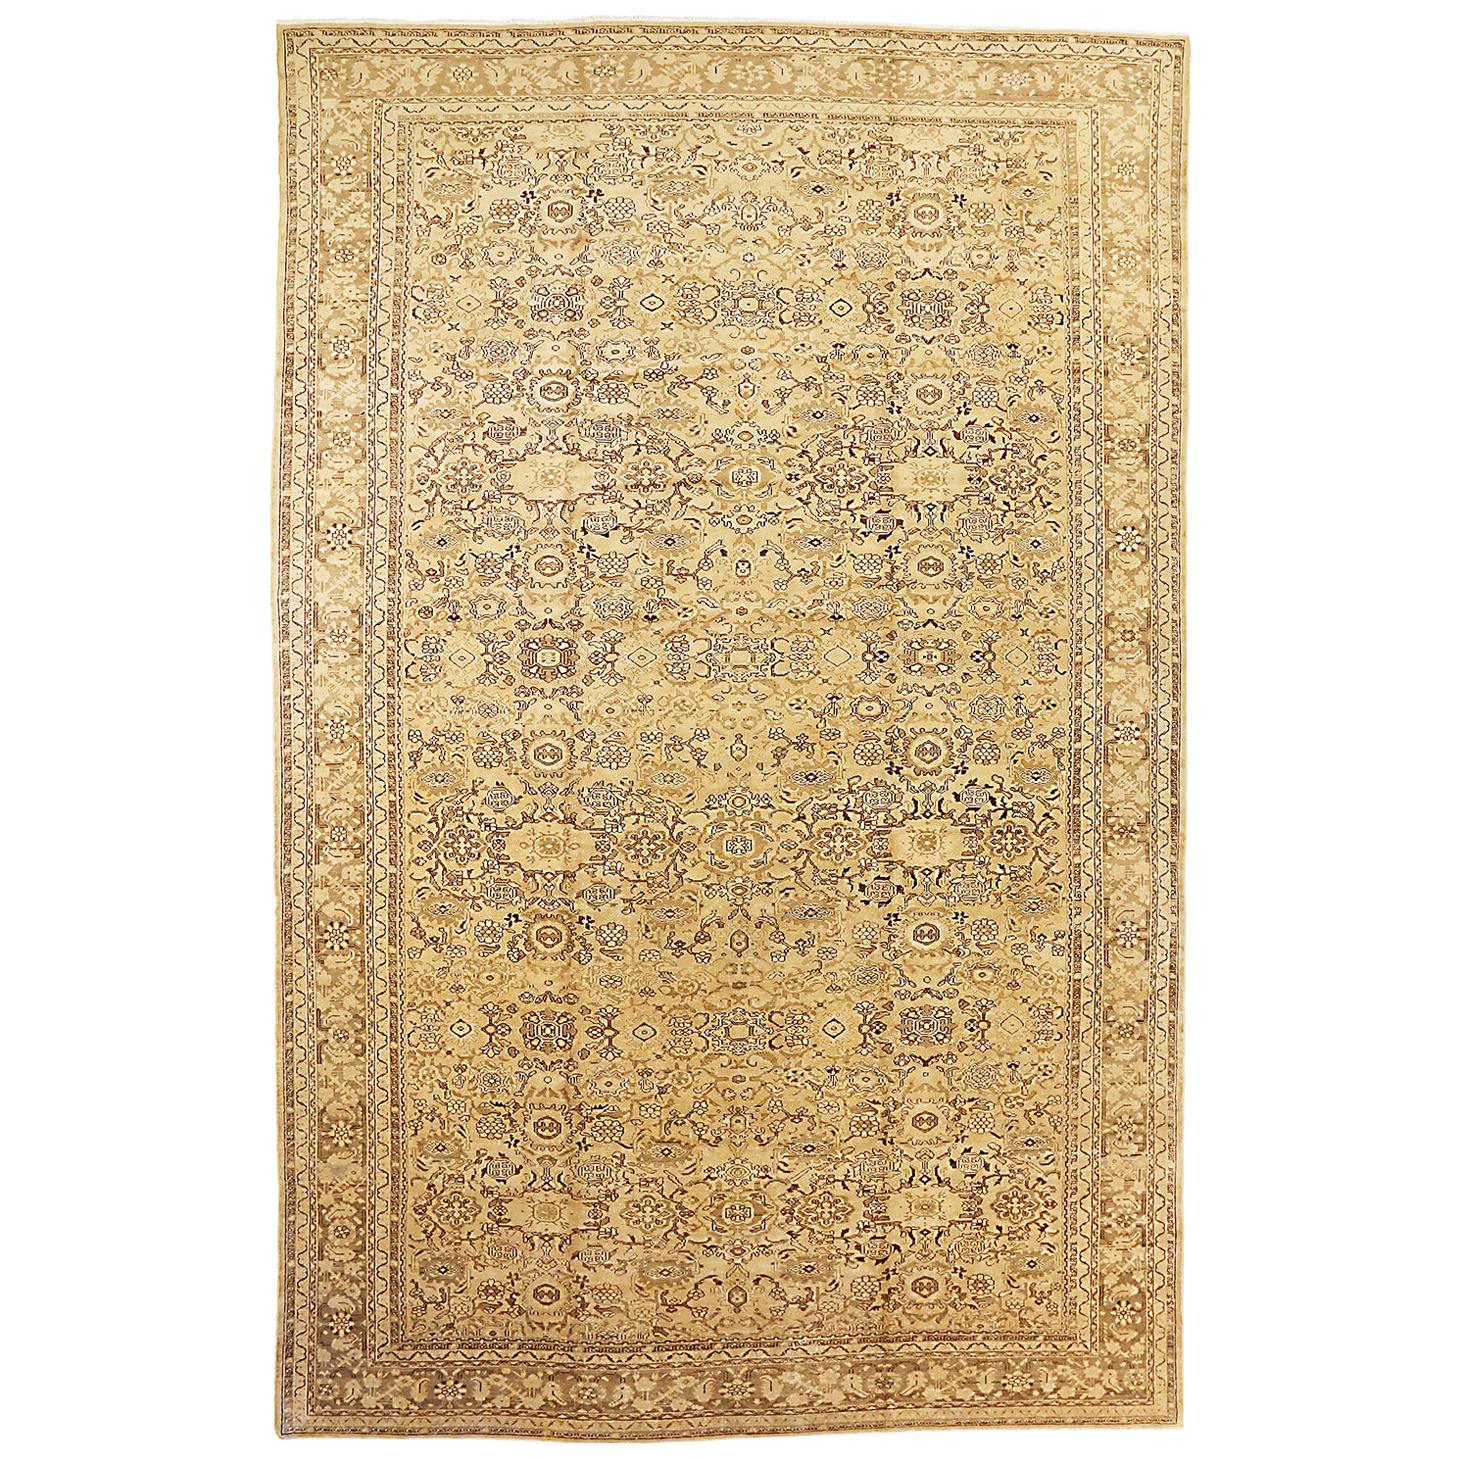 Antique Persian Malayer Rug with Brown and Black Floral Details on Ivory Field